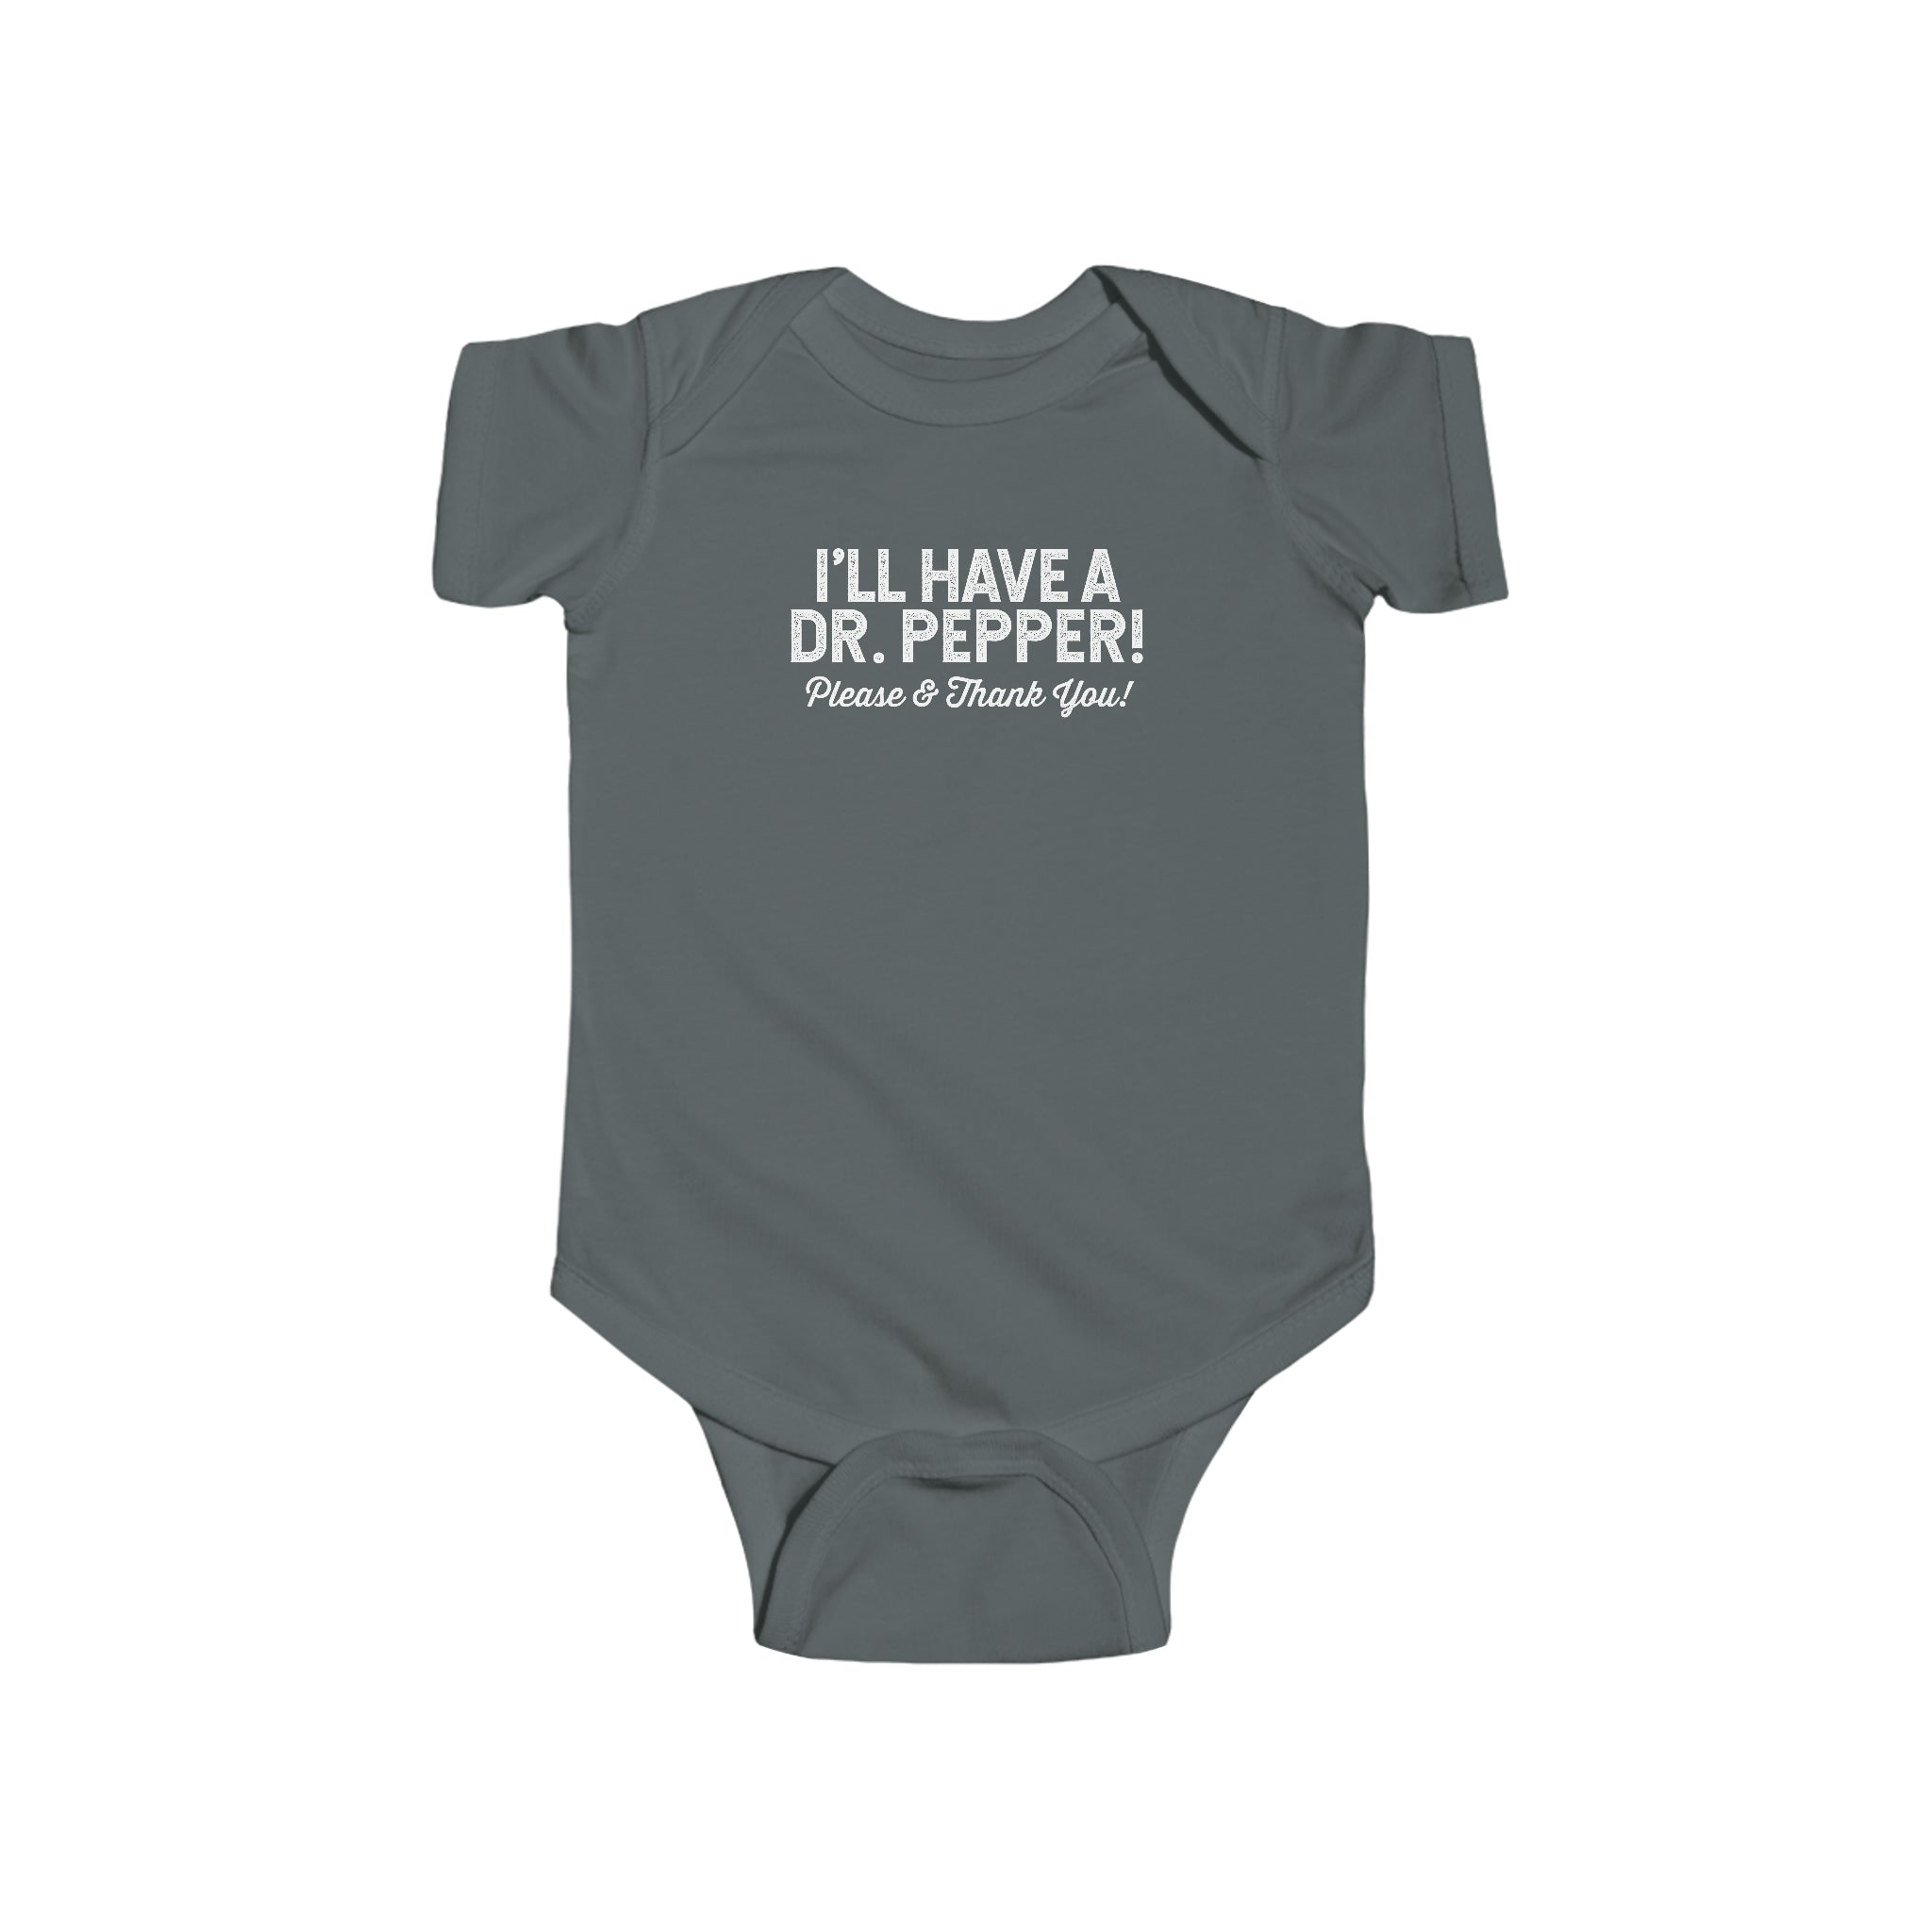 I'll Have a Dr. Pepper Onesie